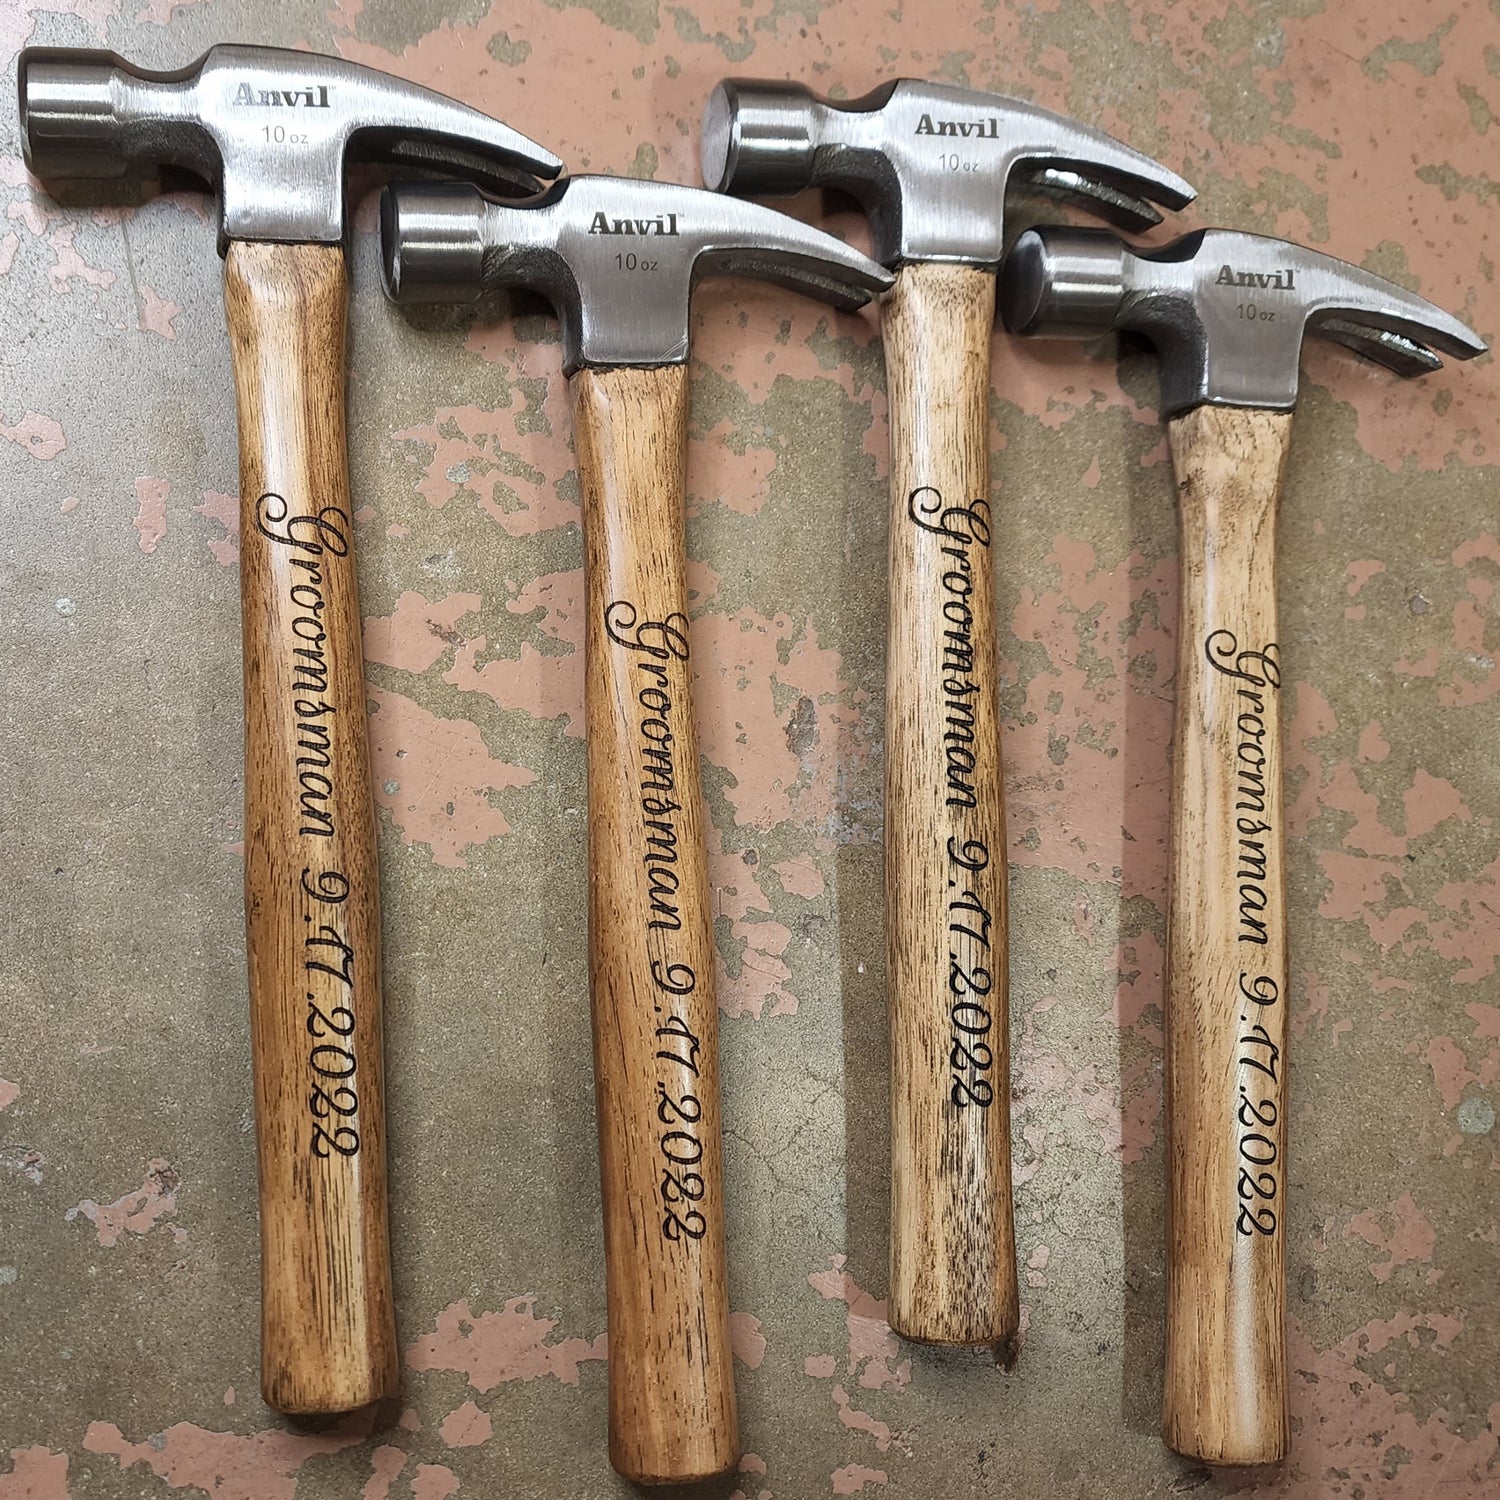 Groomsmen gift idea, Custom Engraved Hammers with Groomsmen and date on 1 side, their names on the other side